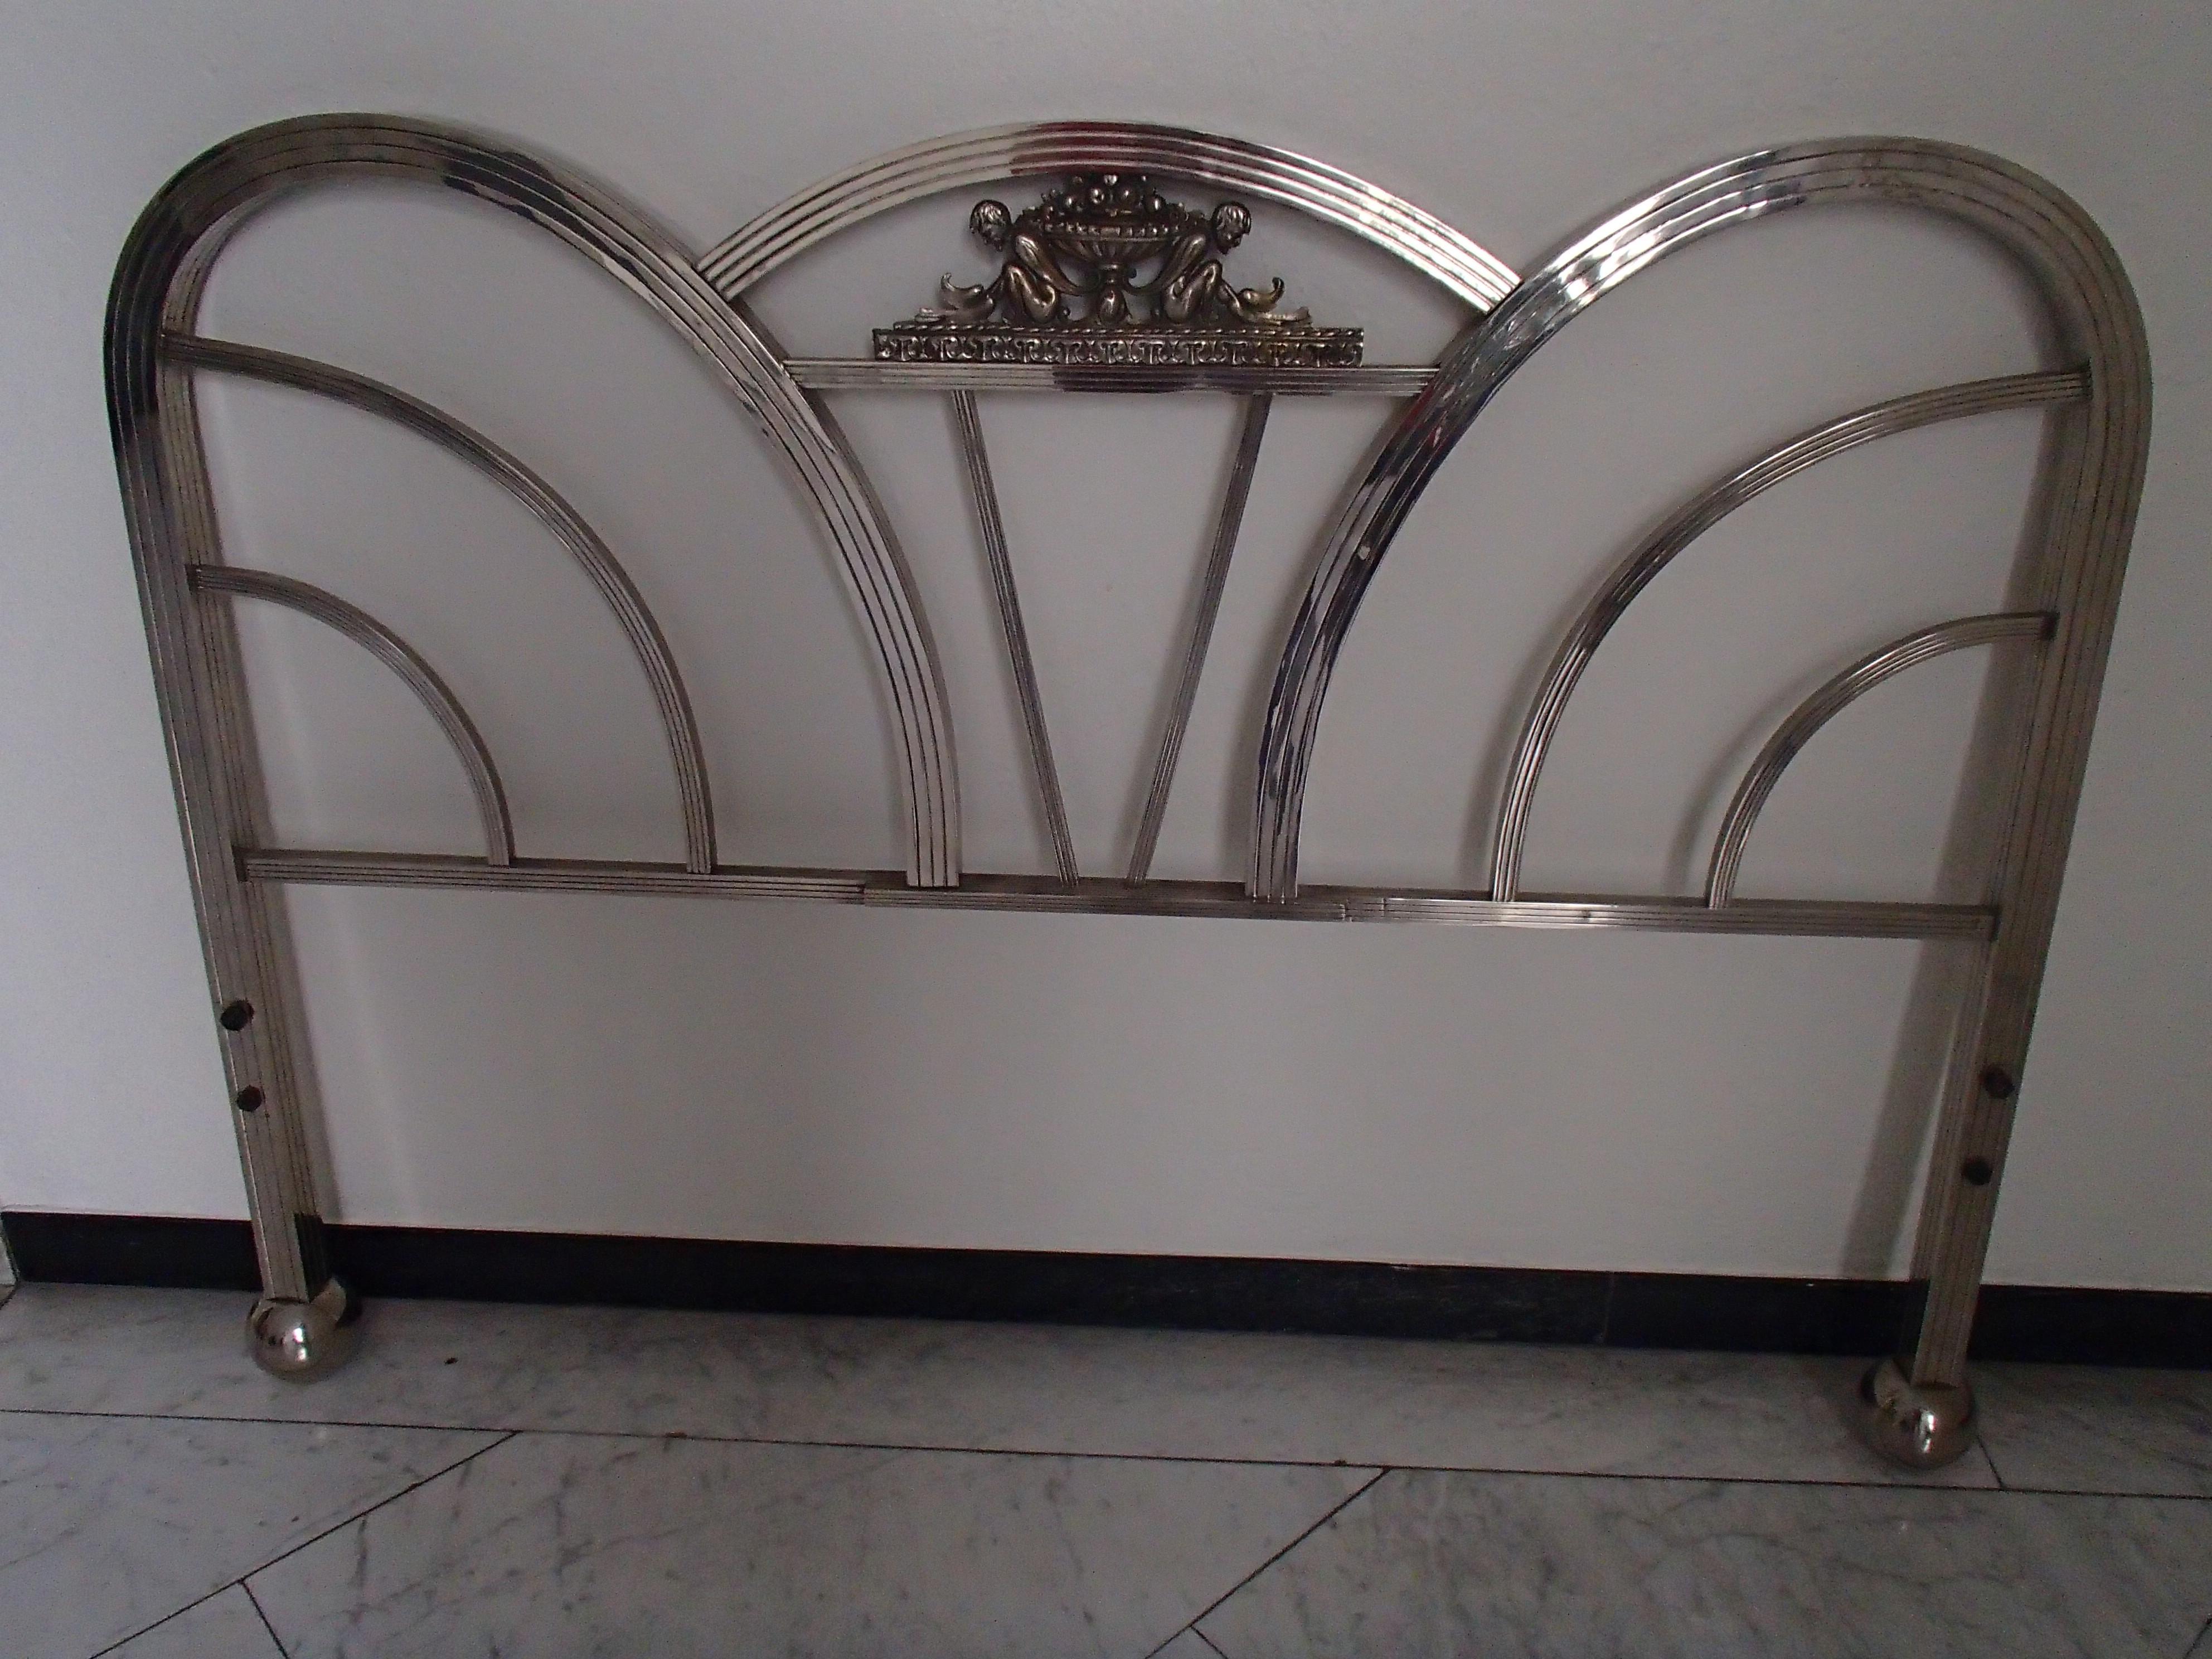 Art Deco chrome French size bed top and base only.
Measures: 135 x 4 cm H: 100 cm head and 70 cm base.